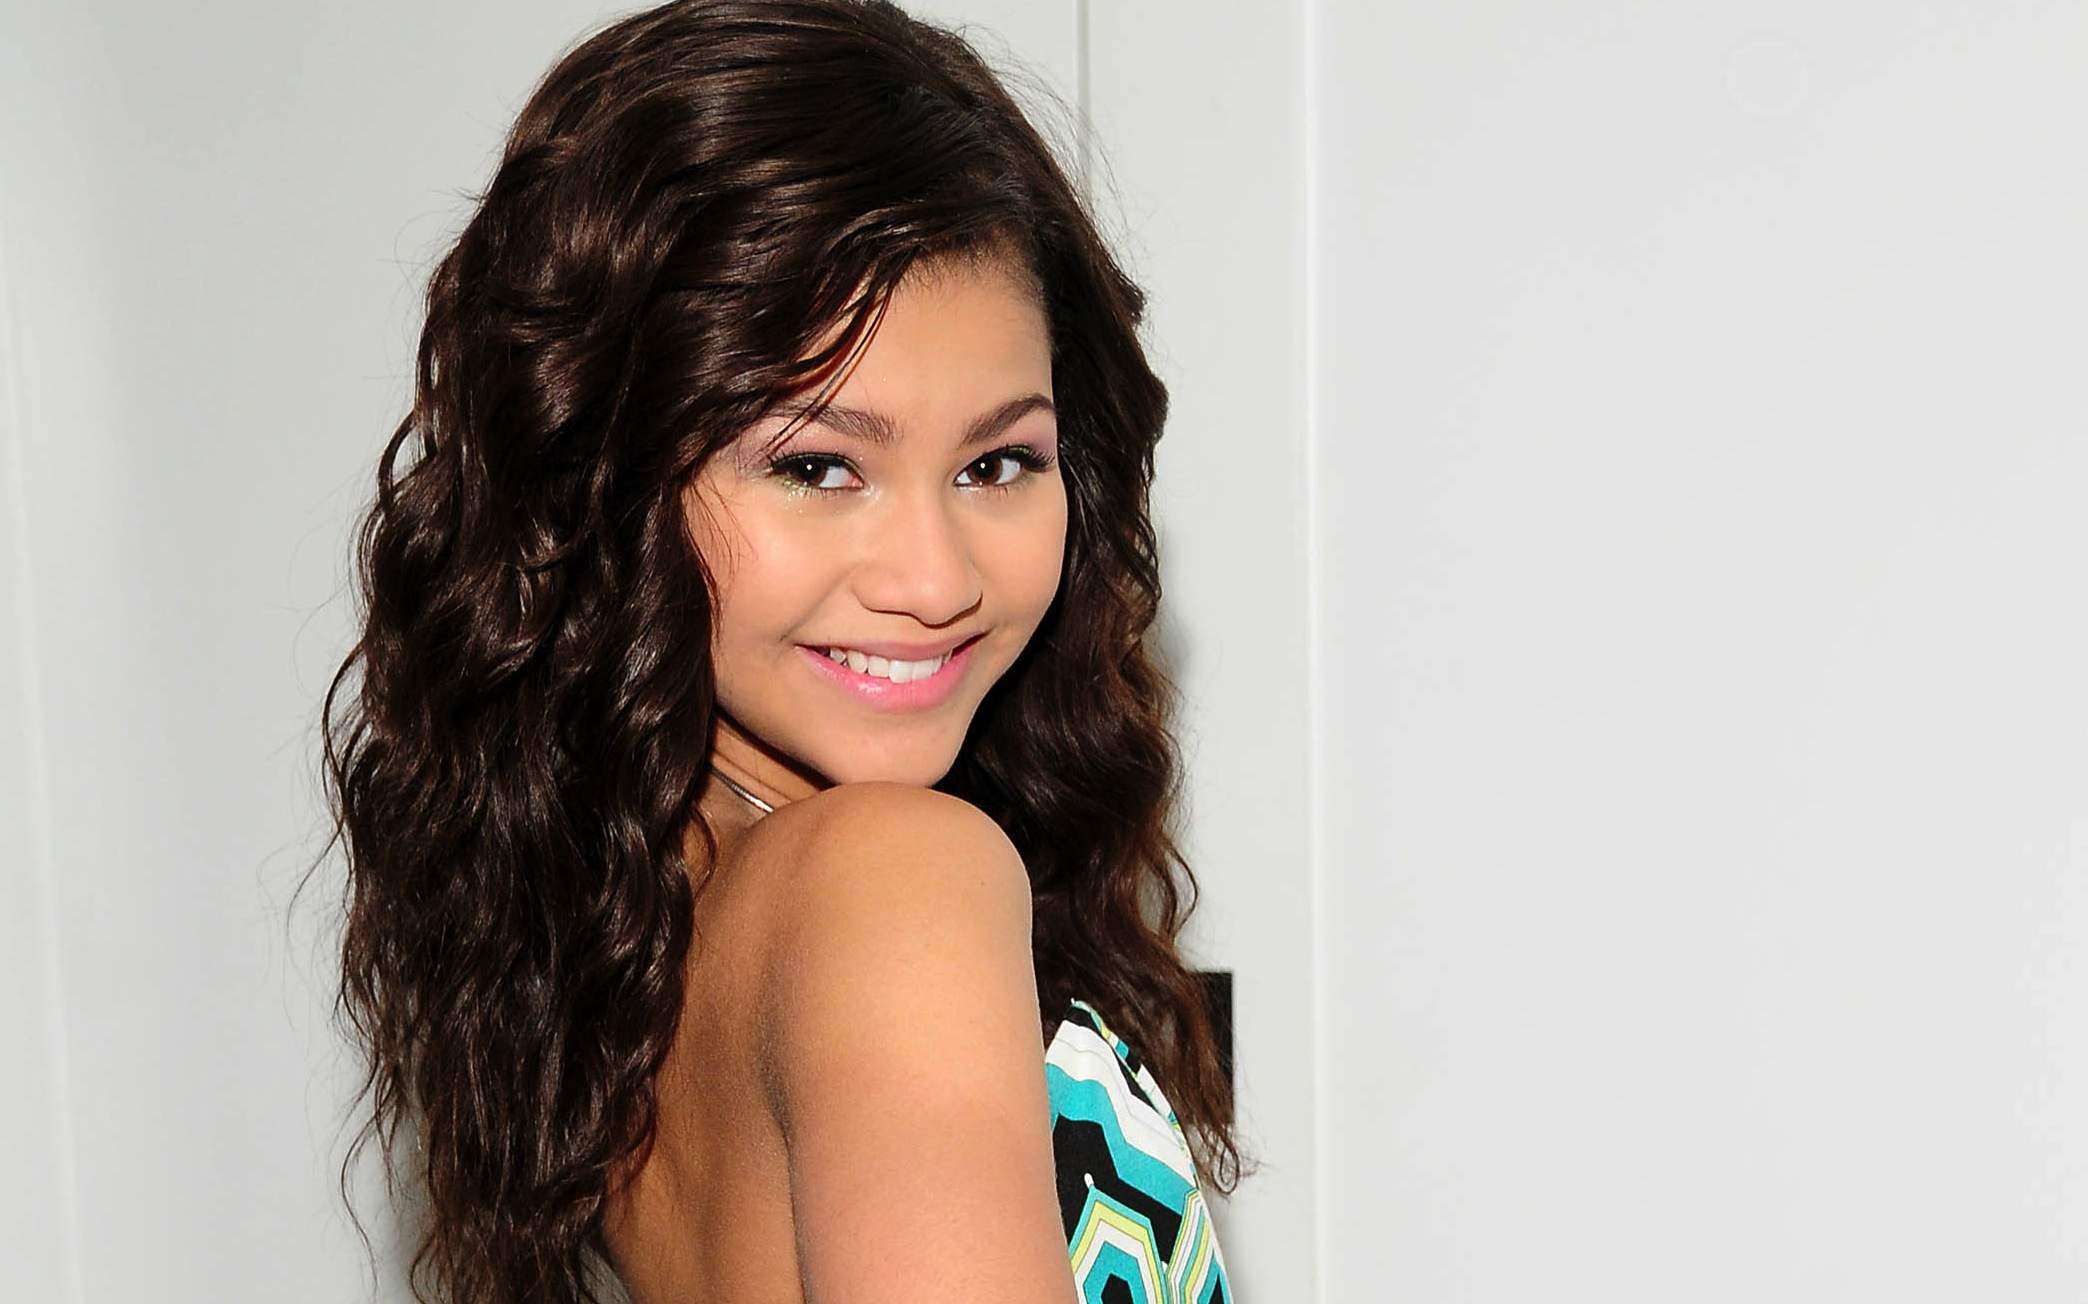 Exclusive-Los Angeles, CA - 12/05/2011 - Zendaya Coleman (Shake It Up!) arrives for an early morning call time. -PICTURED: Zendaya Coleman -PHOTO by: Albert Michael/startraksphoto.com -CS_76504 Startraks Photo New York, NY For licensing please call 212-414-9464 or email sales@startraksphoto.com